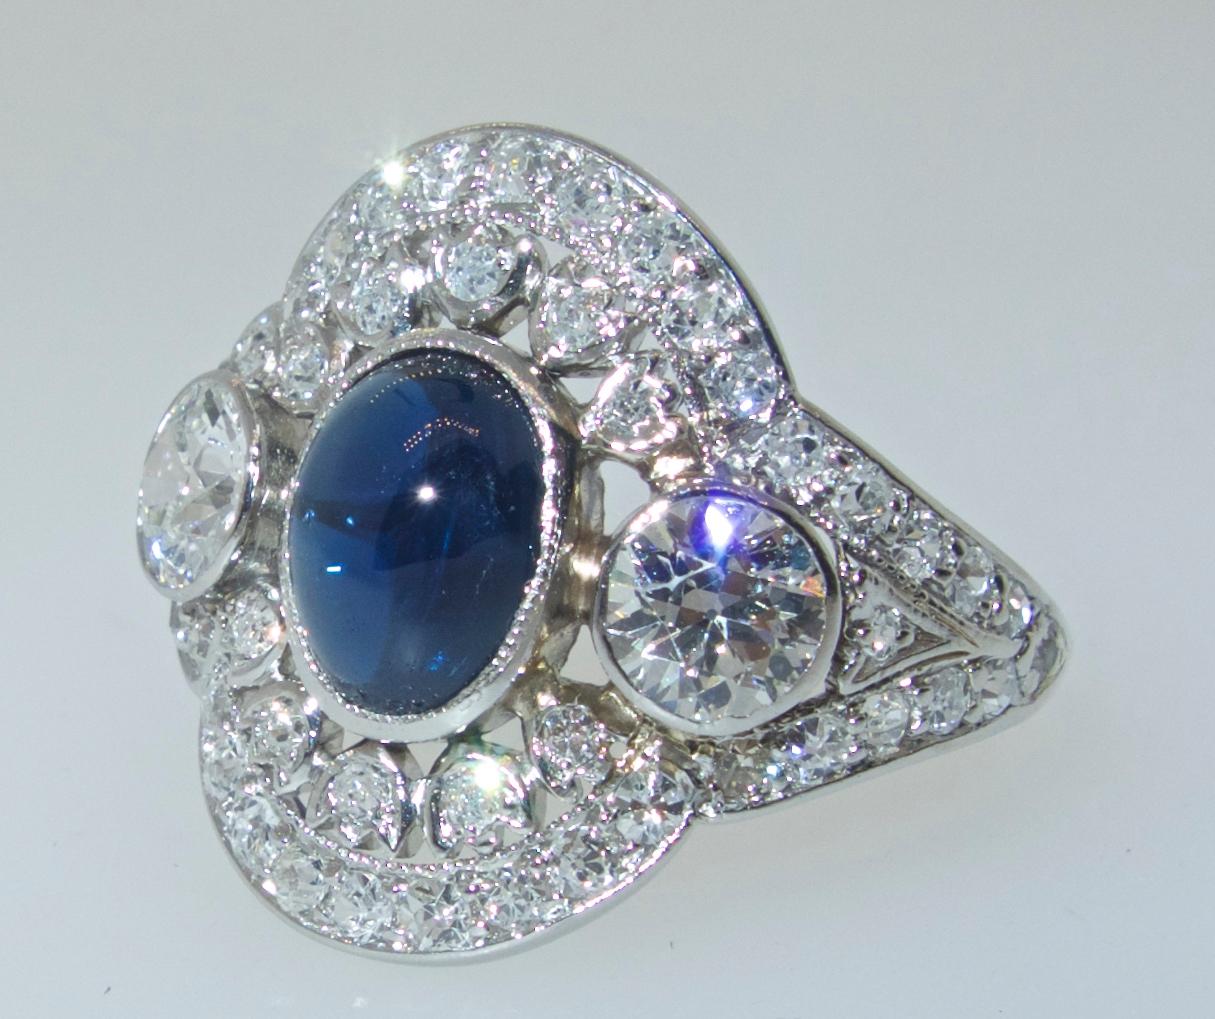 Edwardian platinum ring with fine white diamonds accenting the center fine blue natural, unheated vibrant sapphire.  The European cut diamonds  are white, (H), and very slightly included (VS).  The center sapphire is unheated, a vibrant deep blue